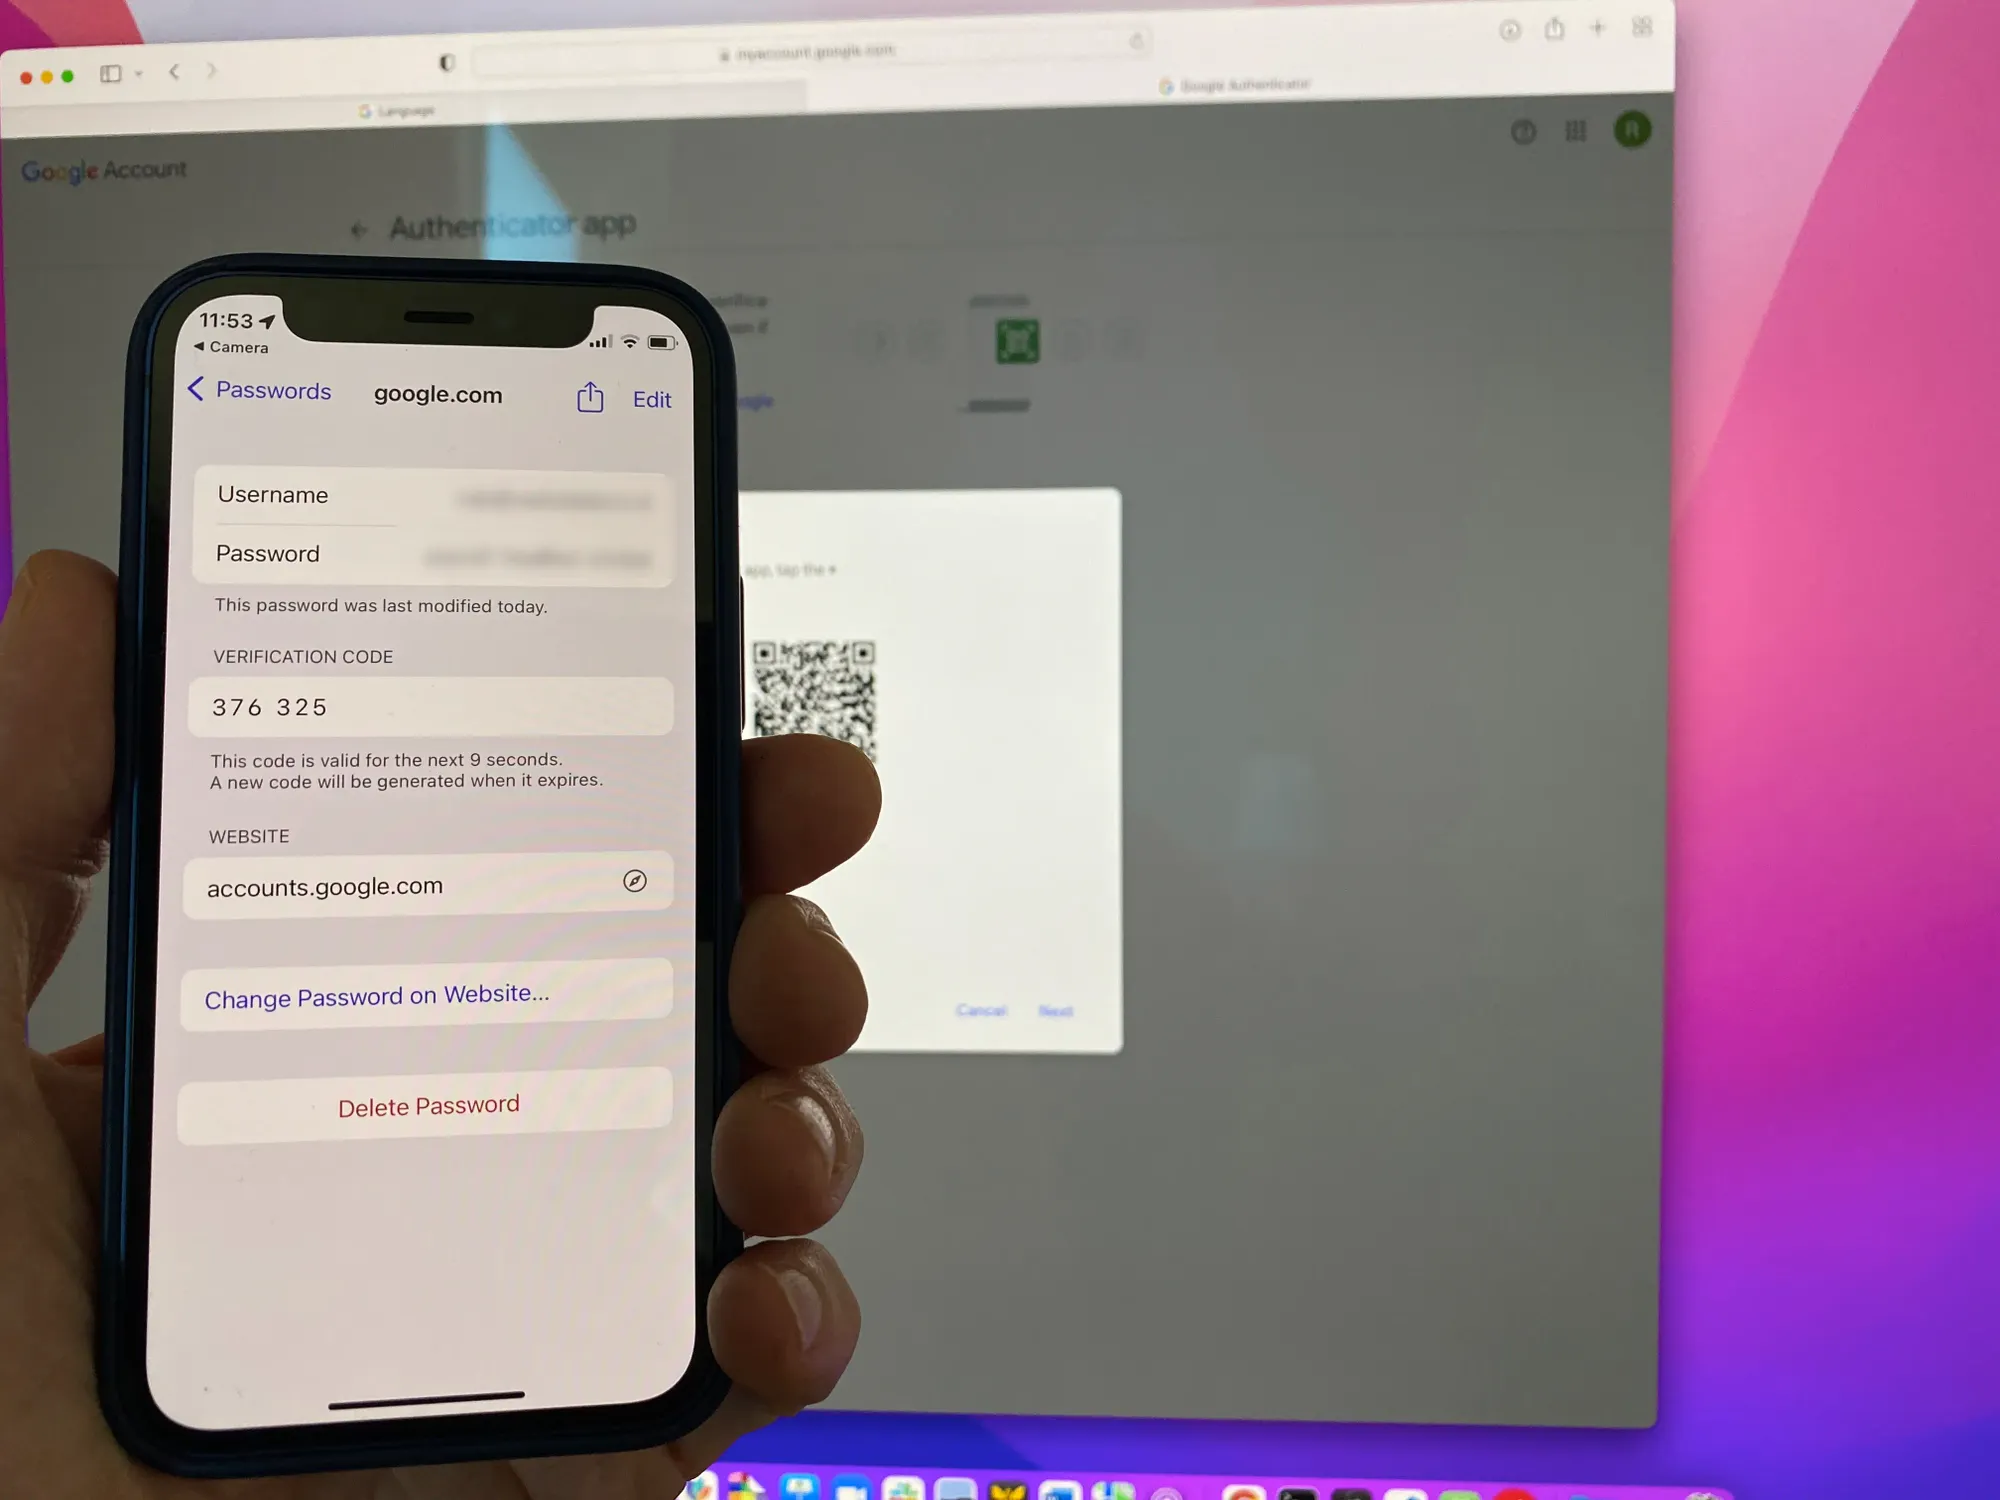 Image showing how to connect 2FA token to account in Apple password manager.